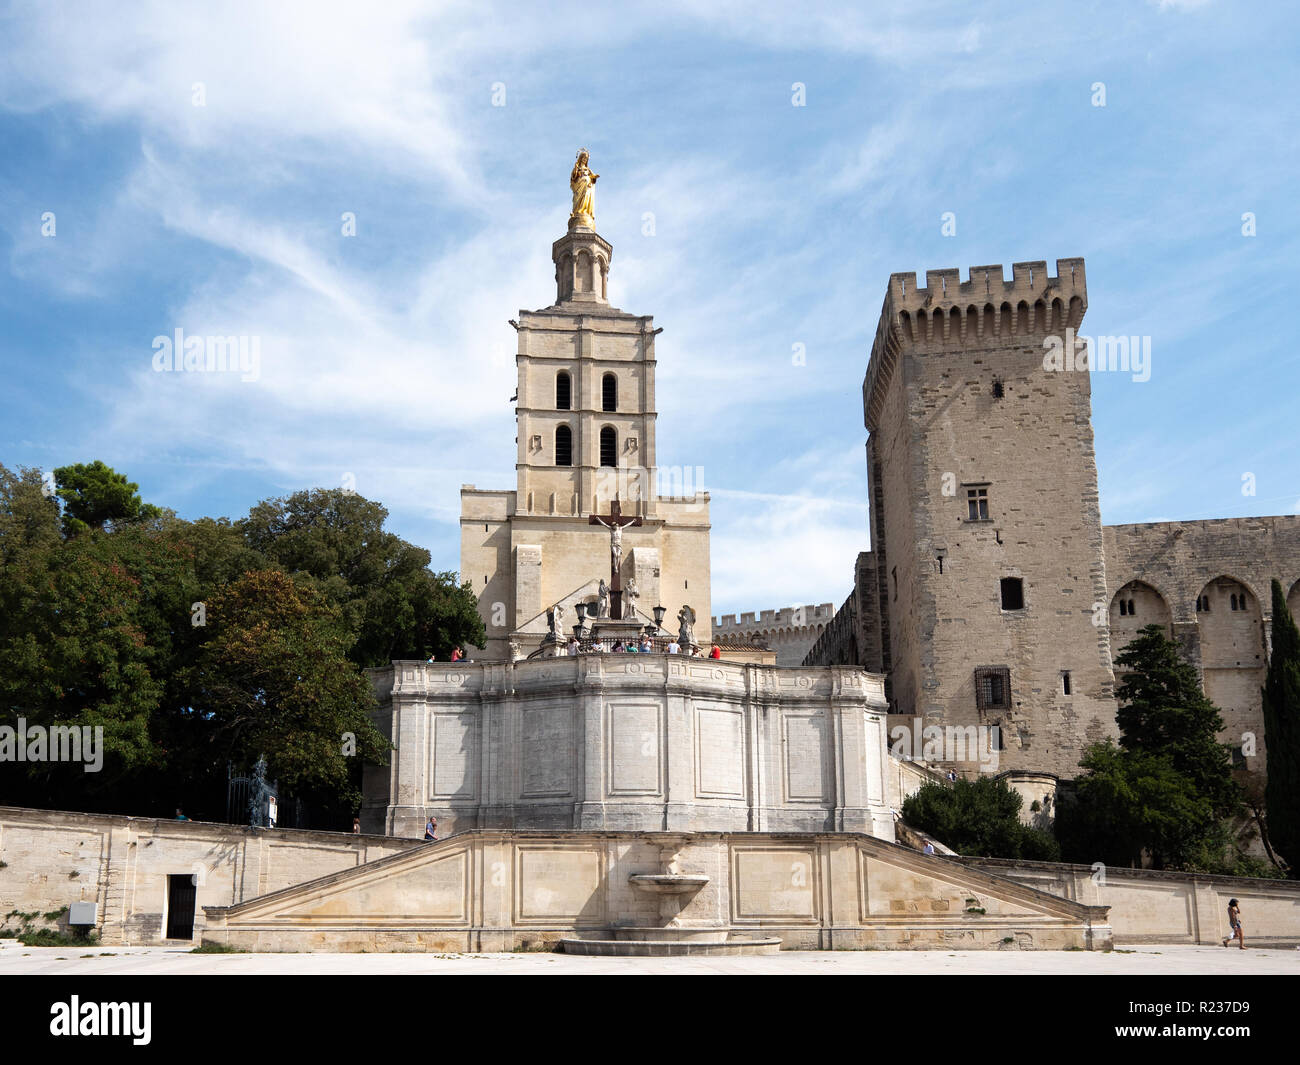 The Papal palace, an historical palace located in Avignon, southern France. It is one of the largest and most important medieval Gothic buildings in E Stock Photo